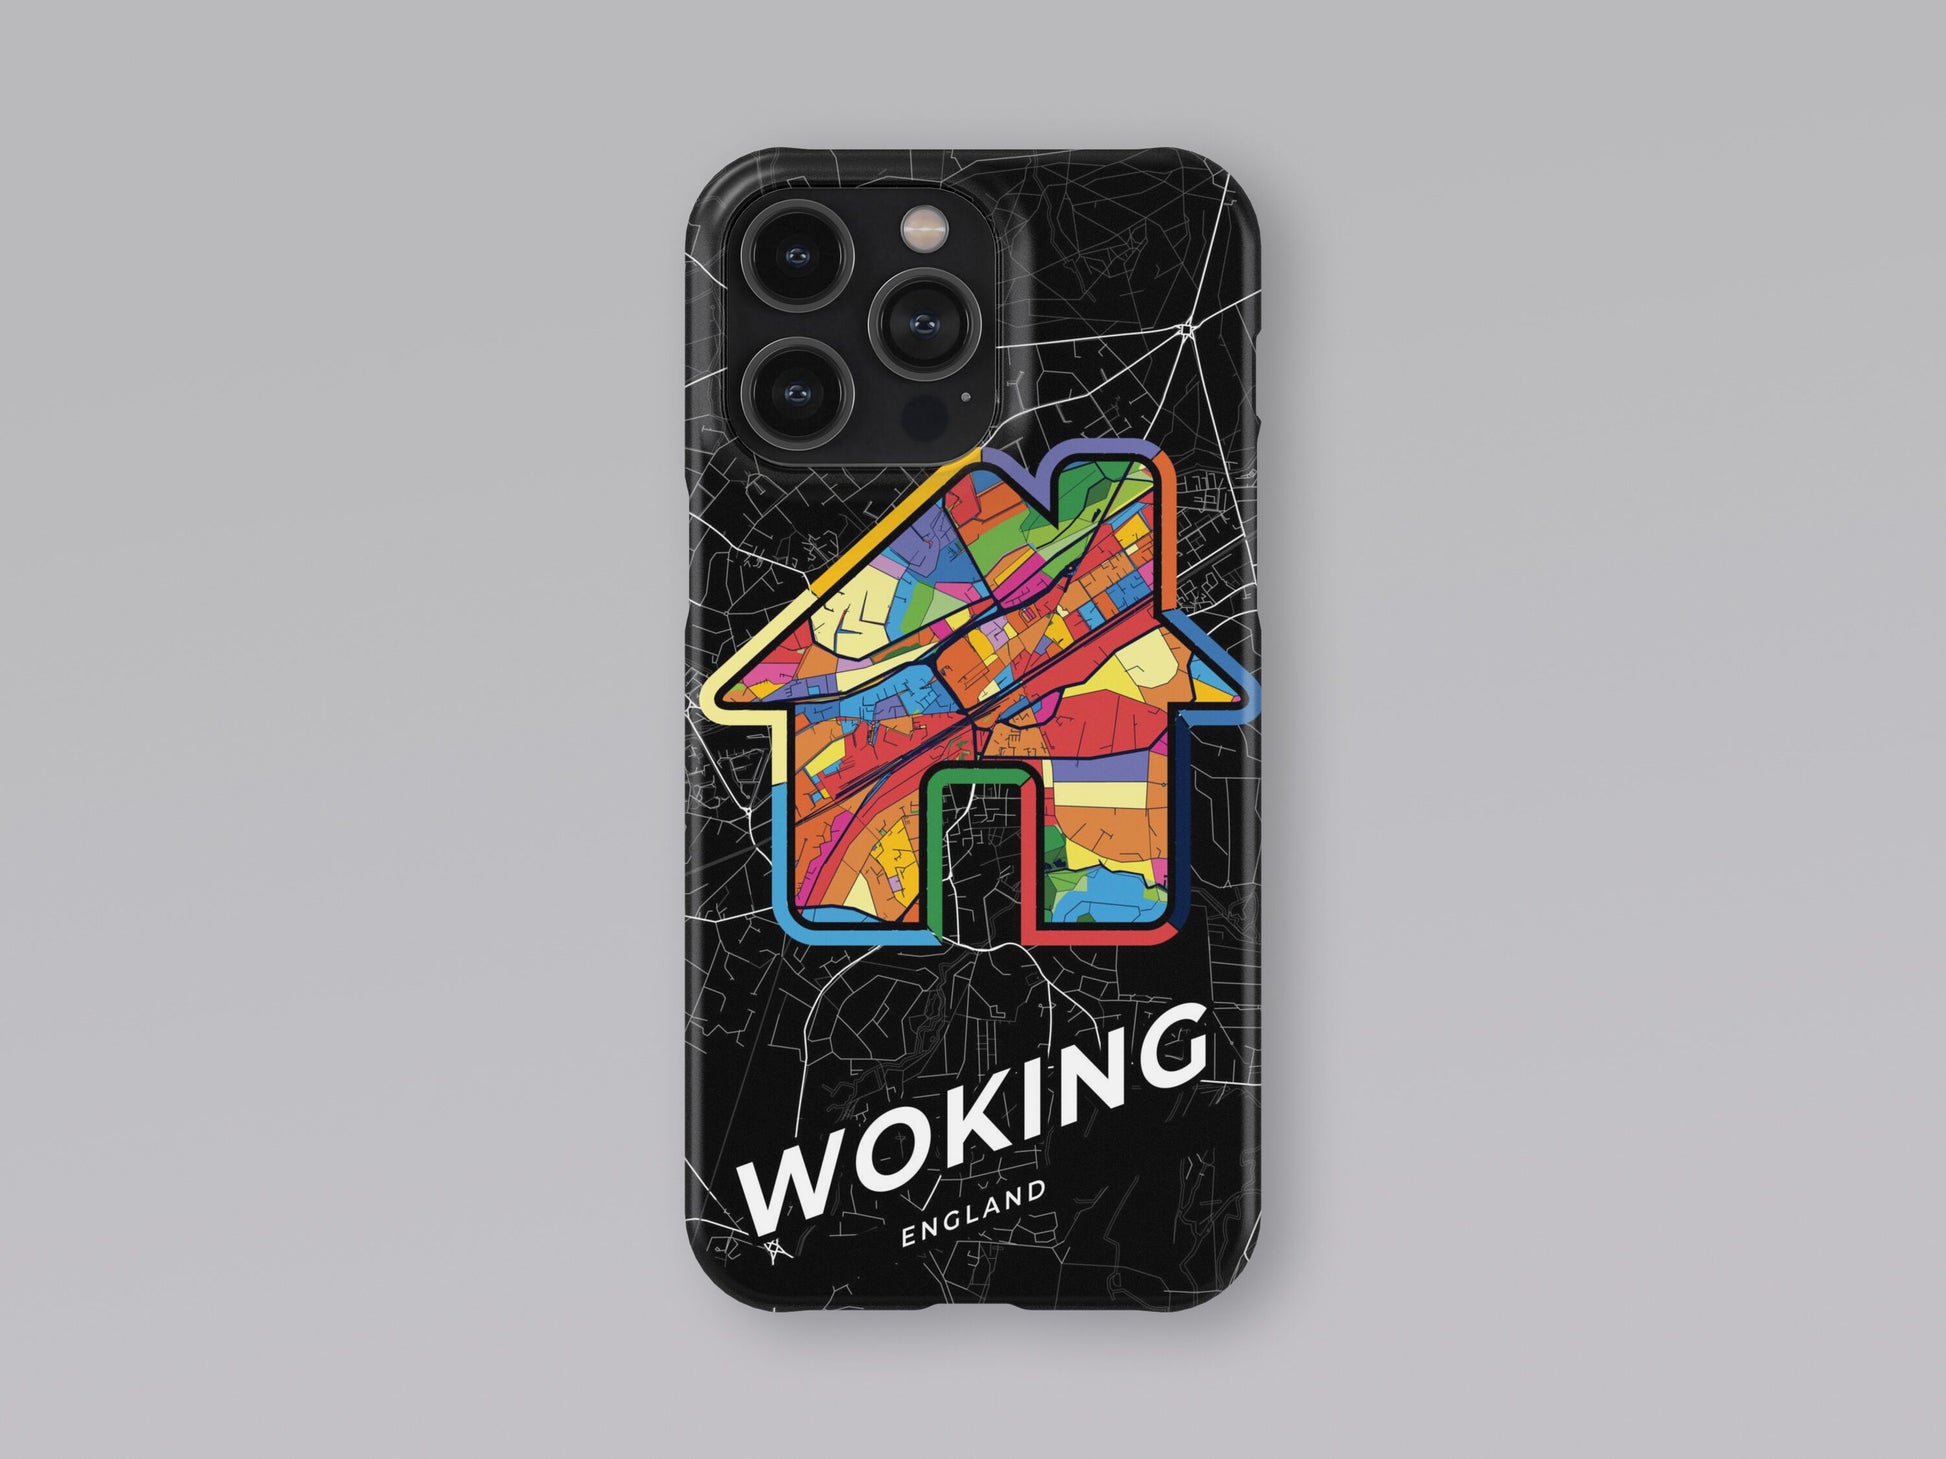 Woking England slim phone case with colorful icon 3